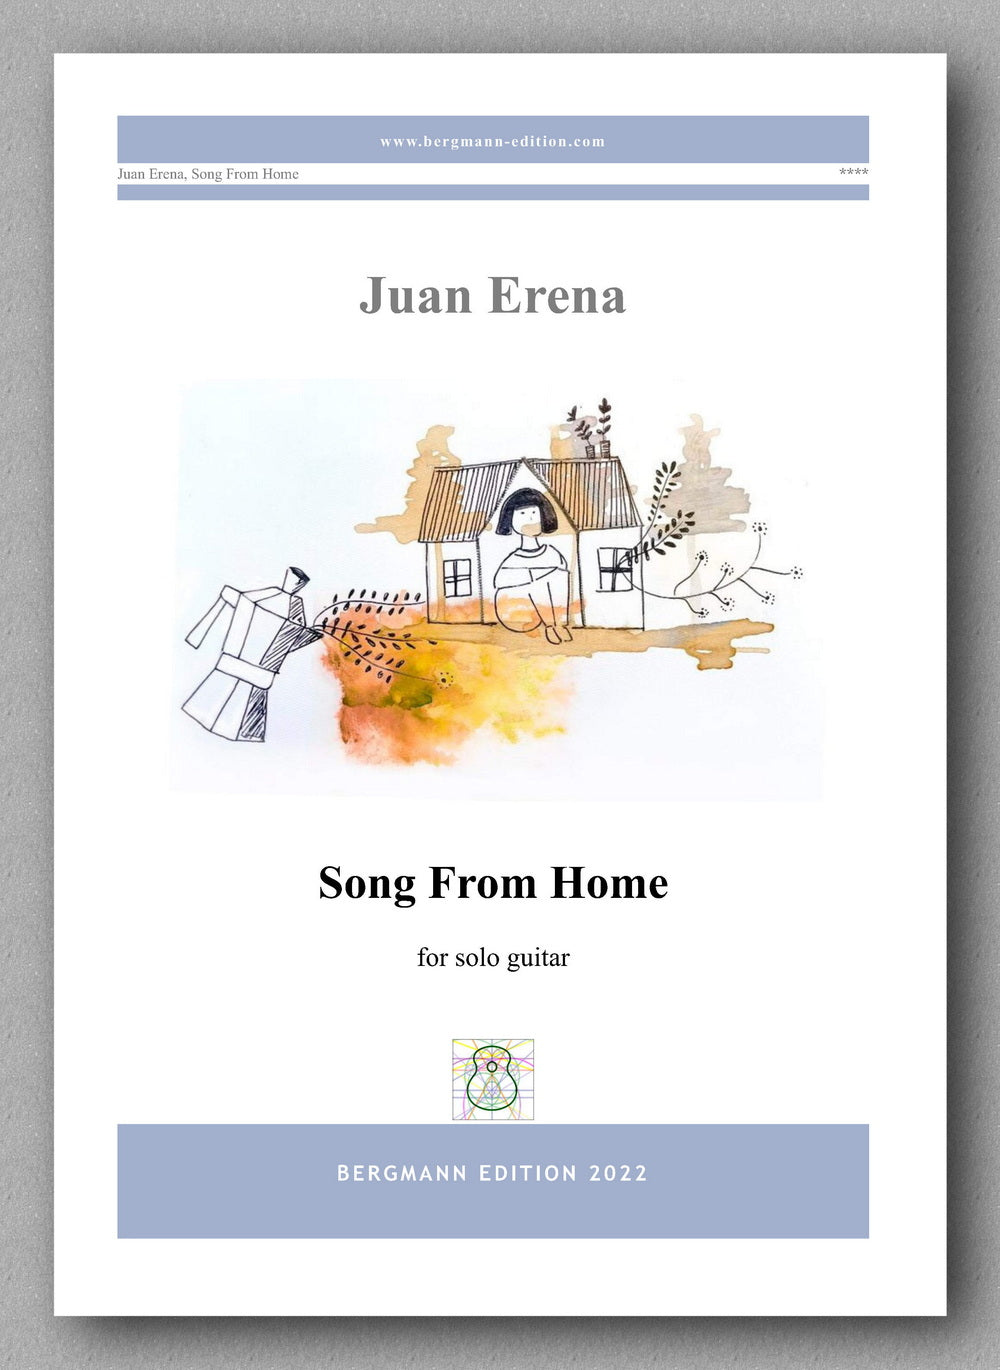 Juan Erena, Song From Home - preview of the cover